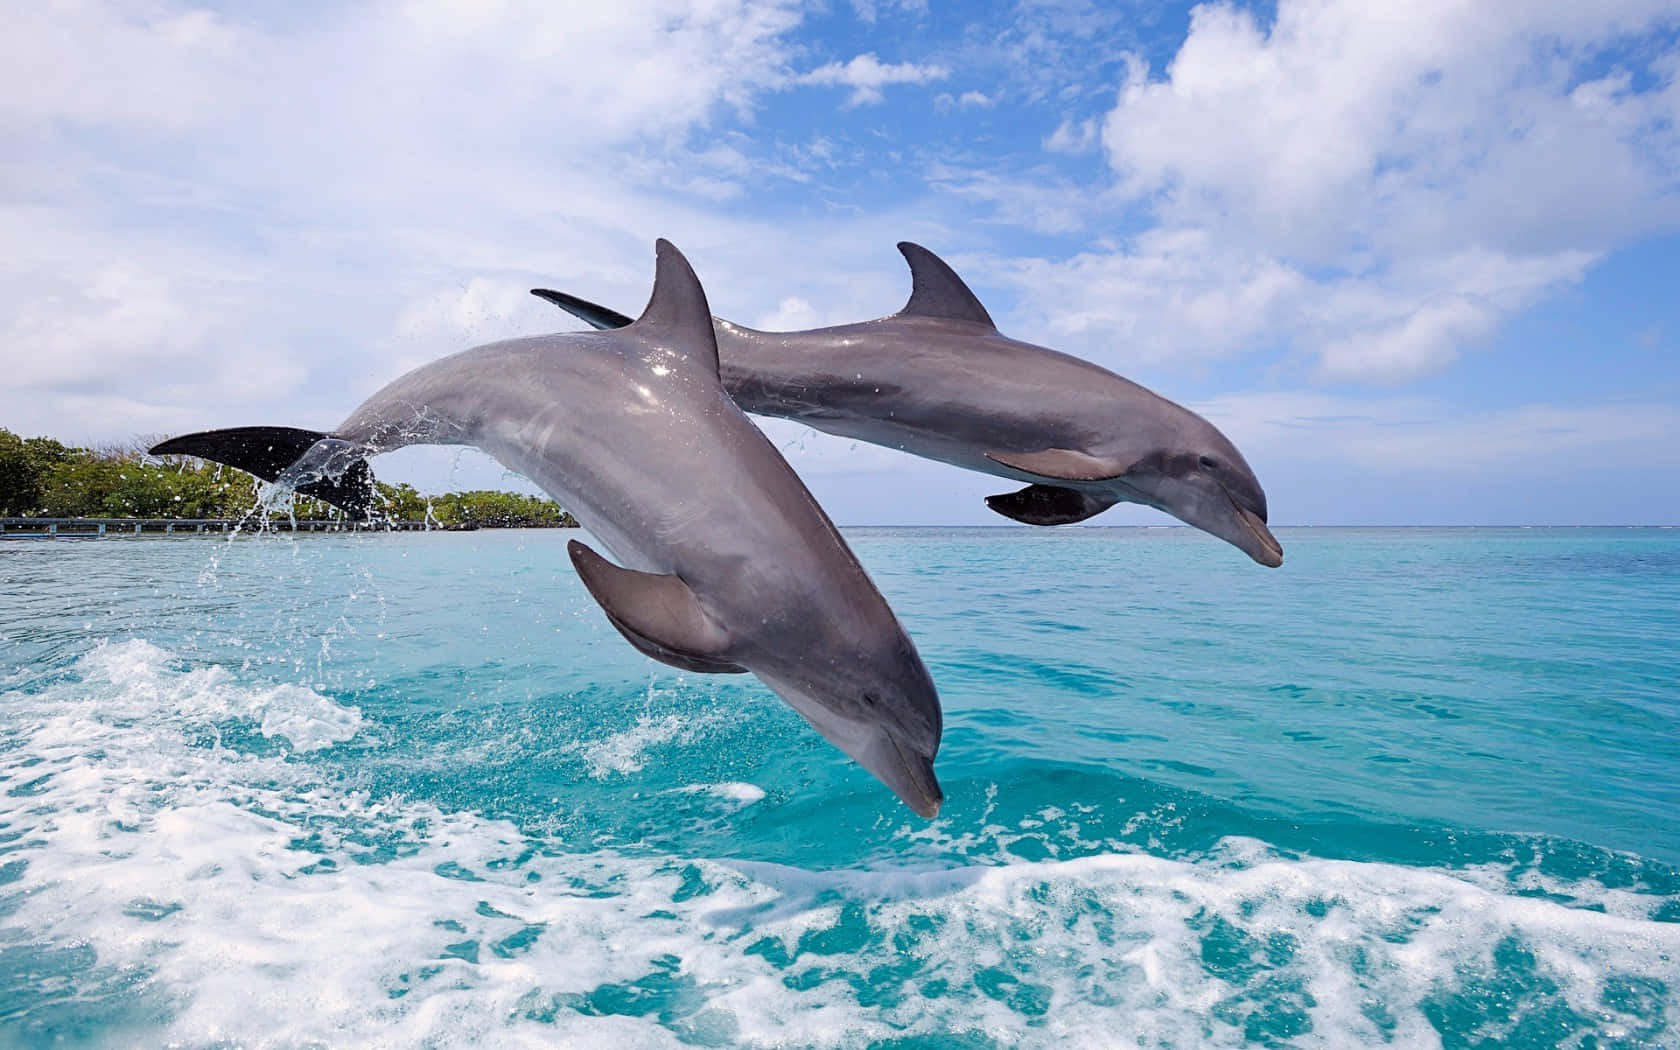 Discover the beauty of nature while swimming with dolphins.